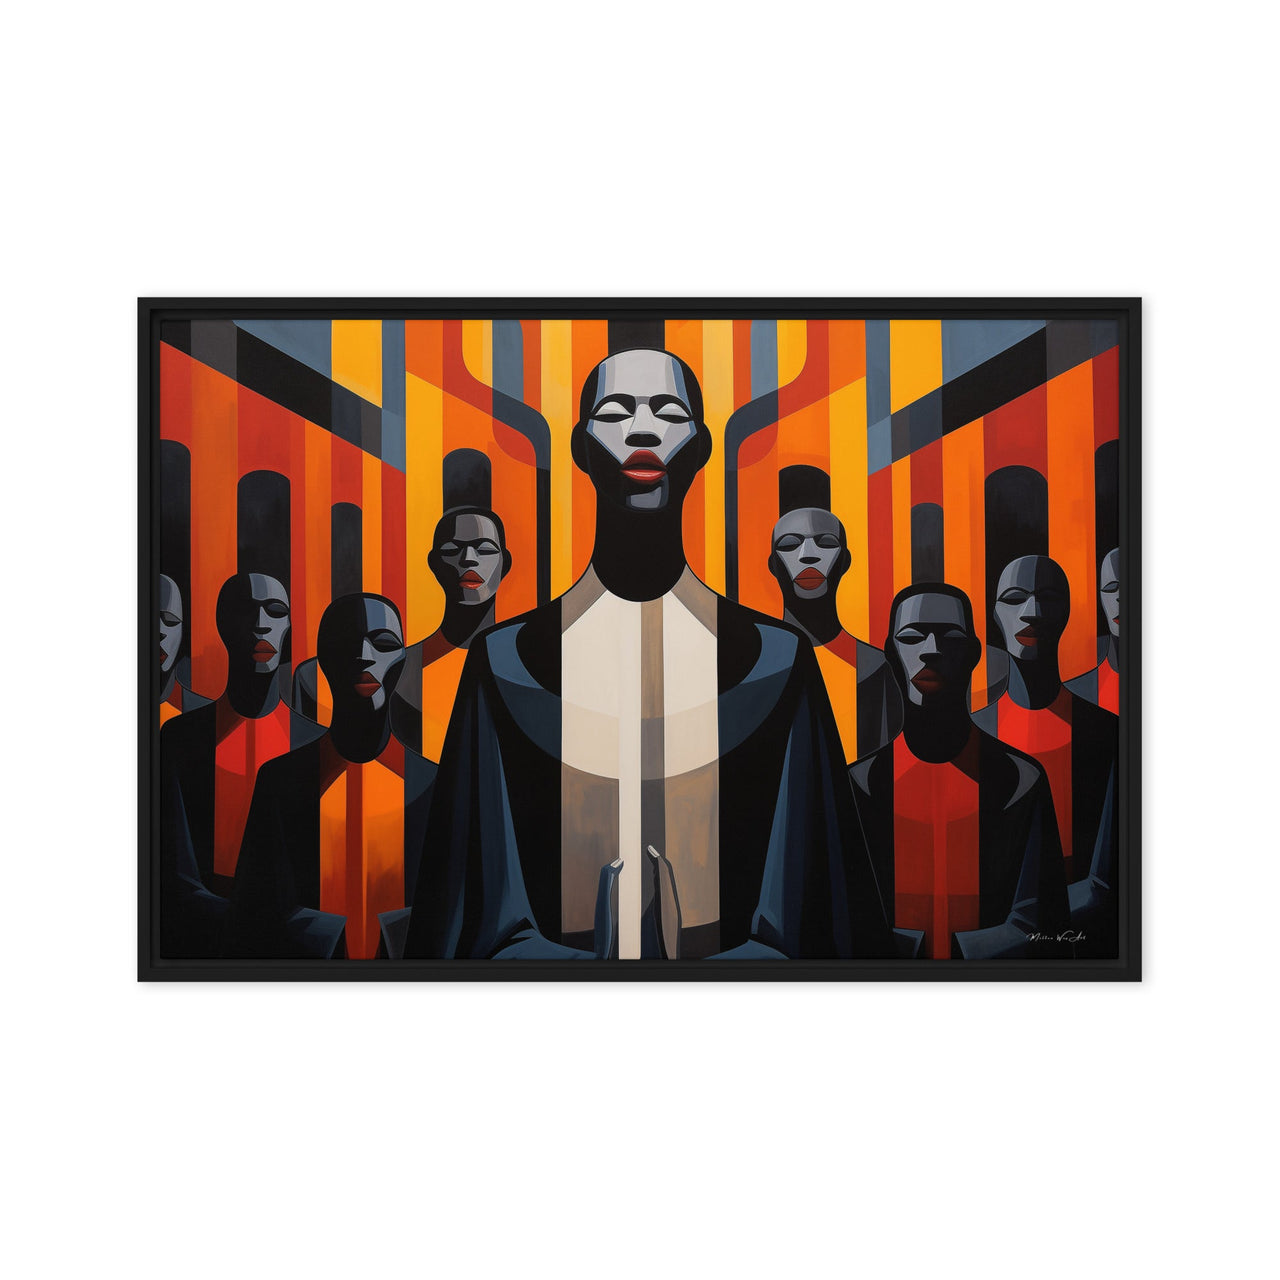 Dynamic framed canvas print from Milton Wes Art featuring a central figure surrounded by silhouetted characters against a patterned backdrop, a striking piece from the Harlem-based retailer miltonwesart.com